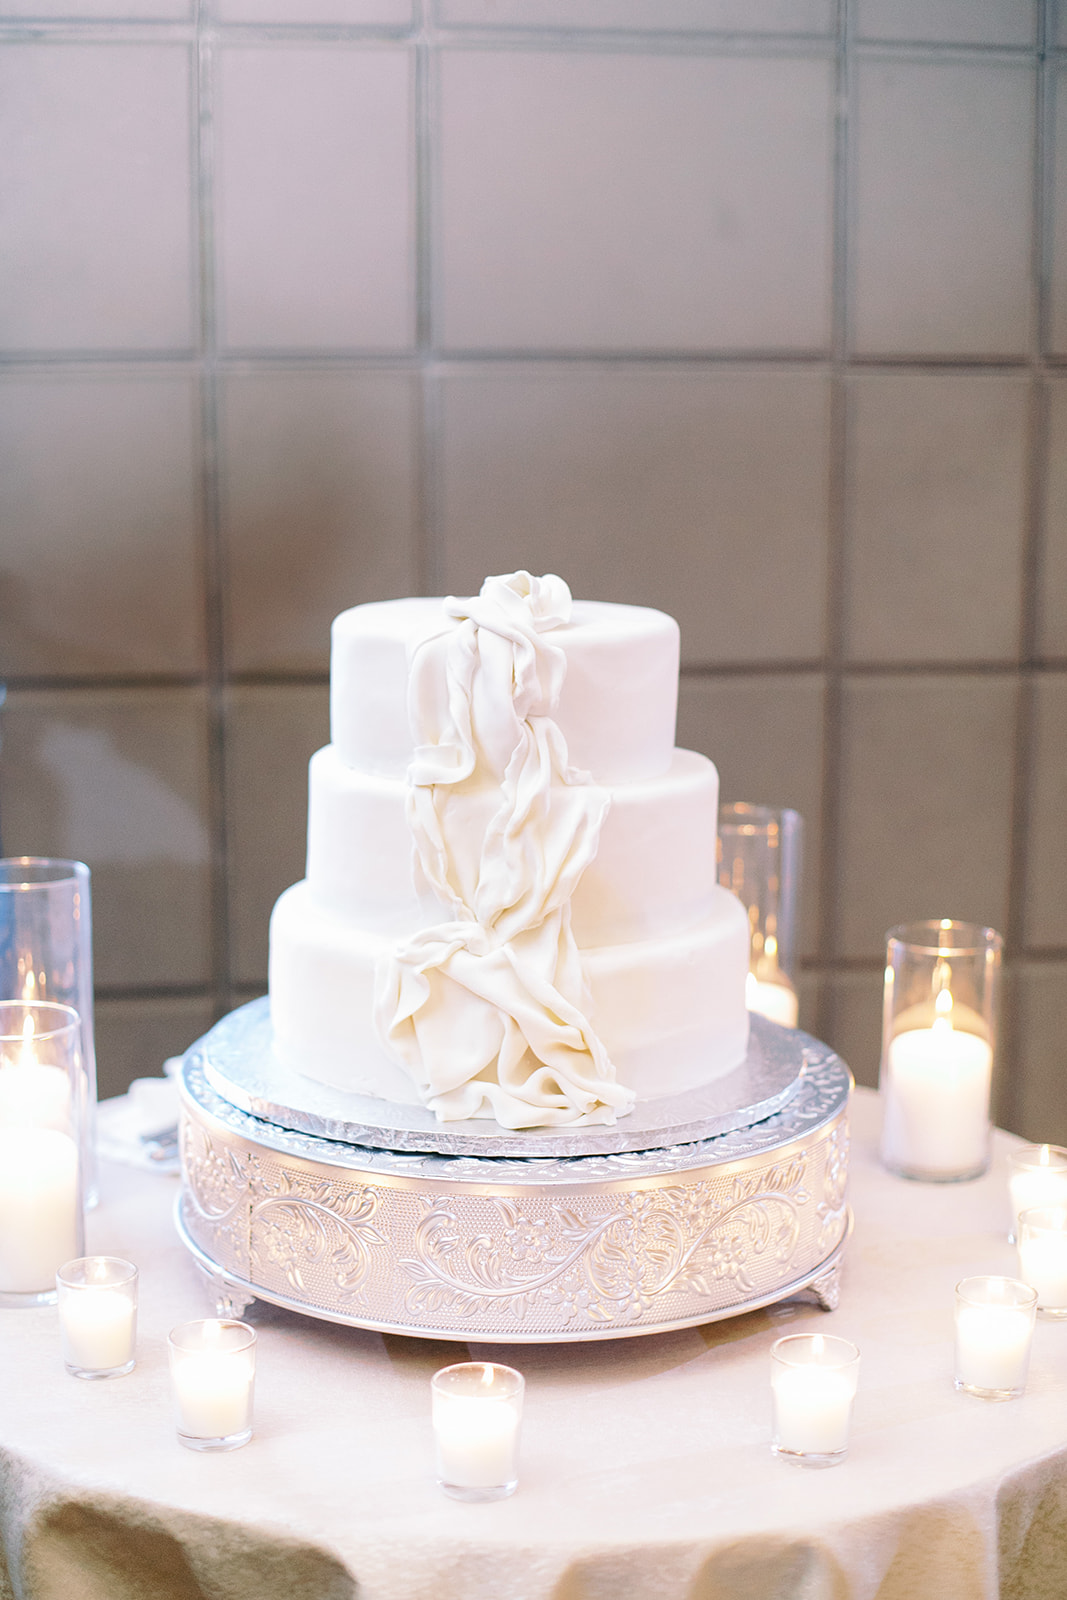 Three tiered white wedding cake with faux draping down side.